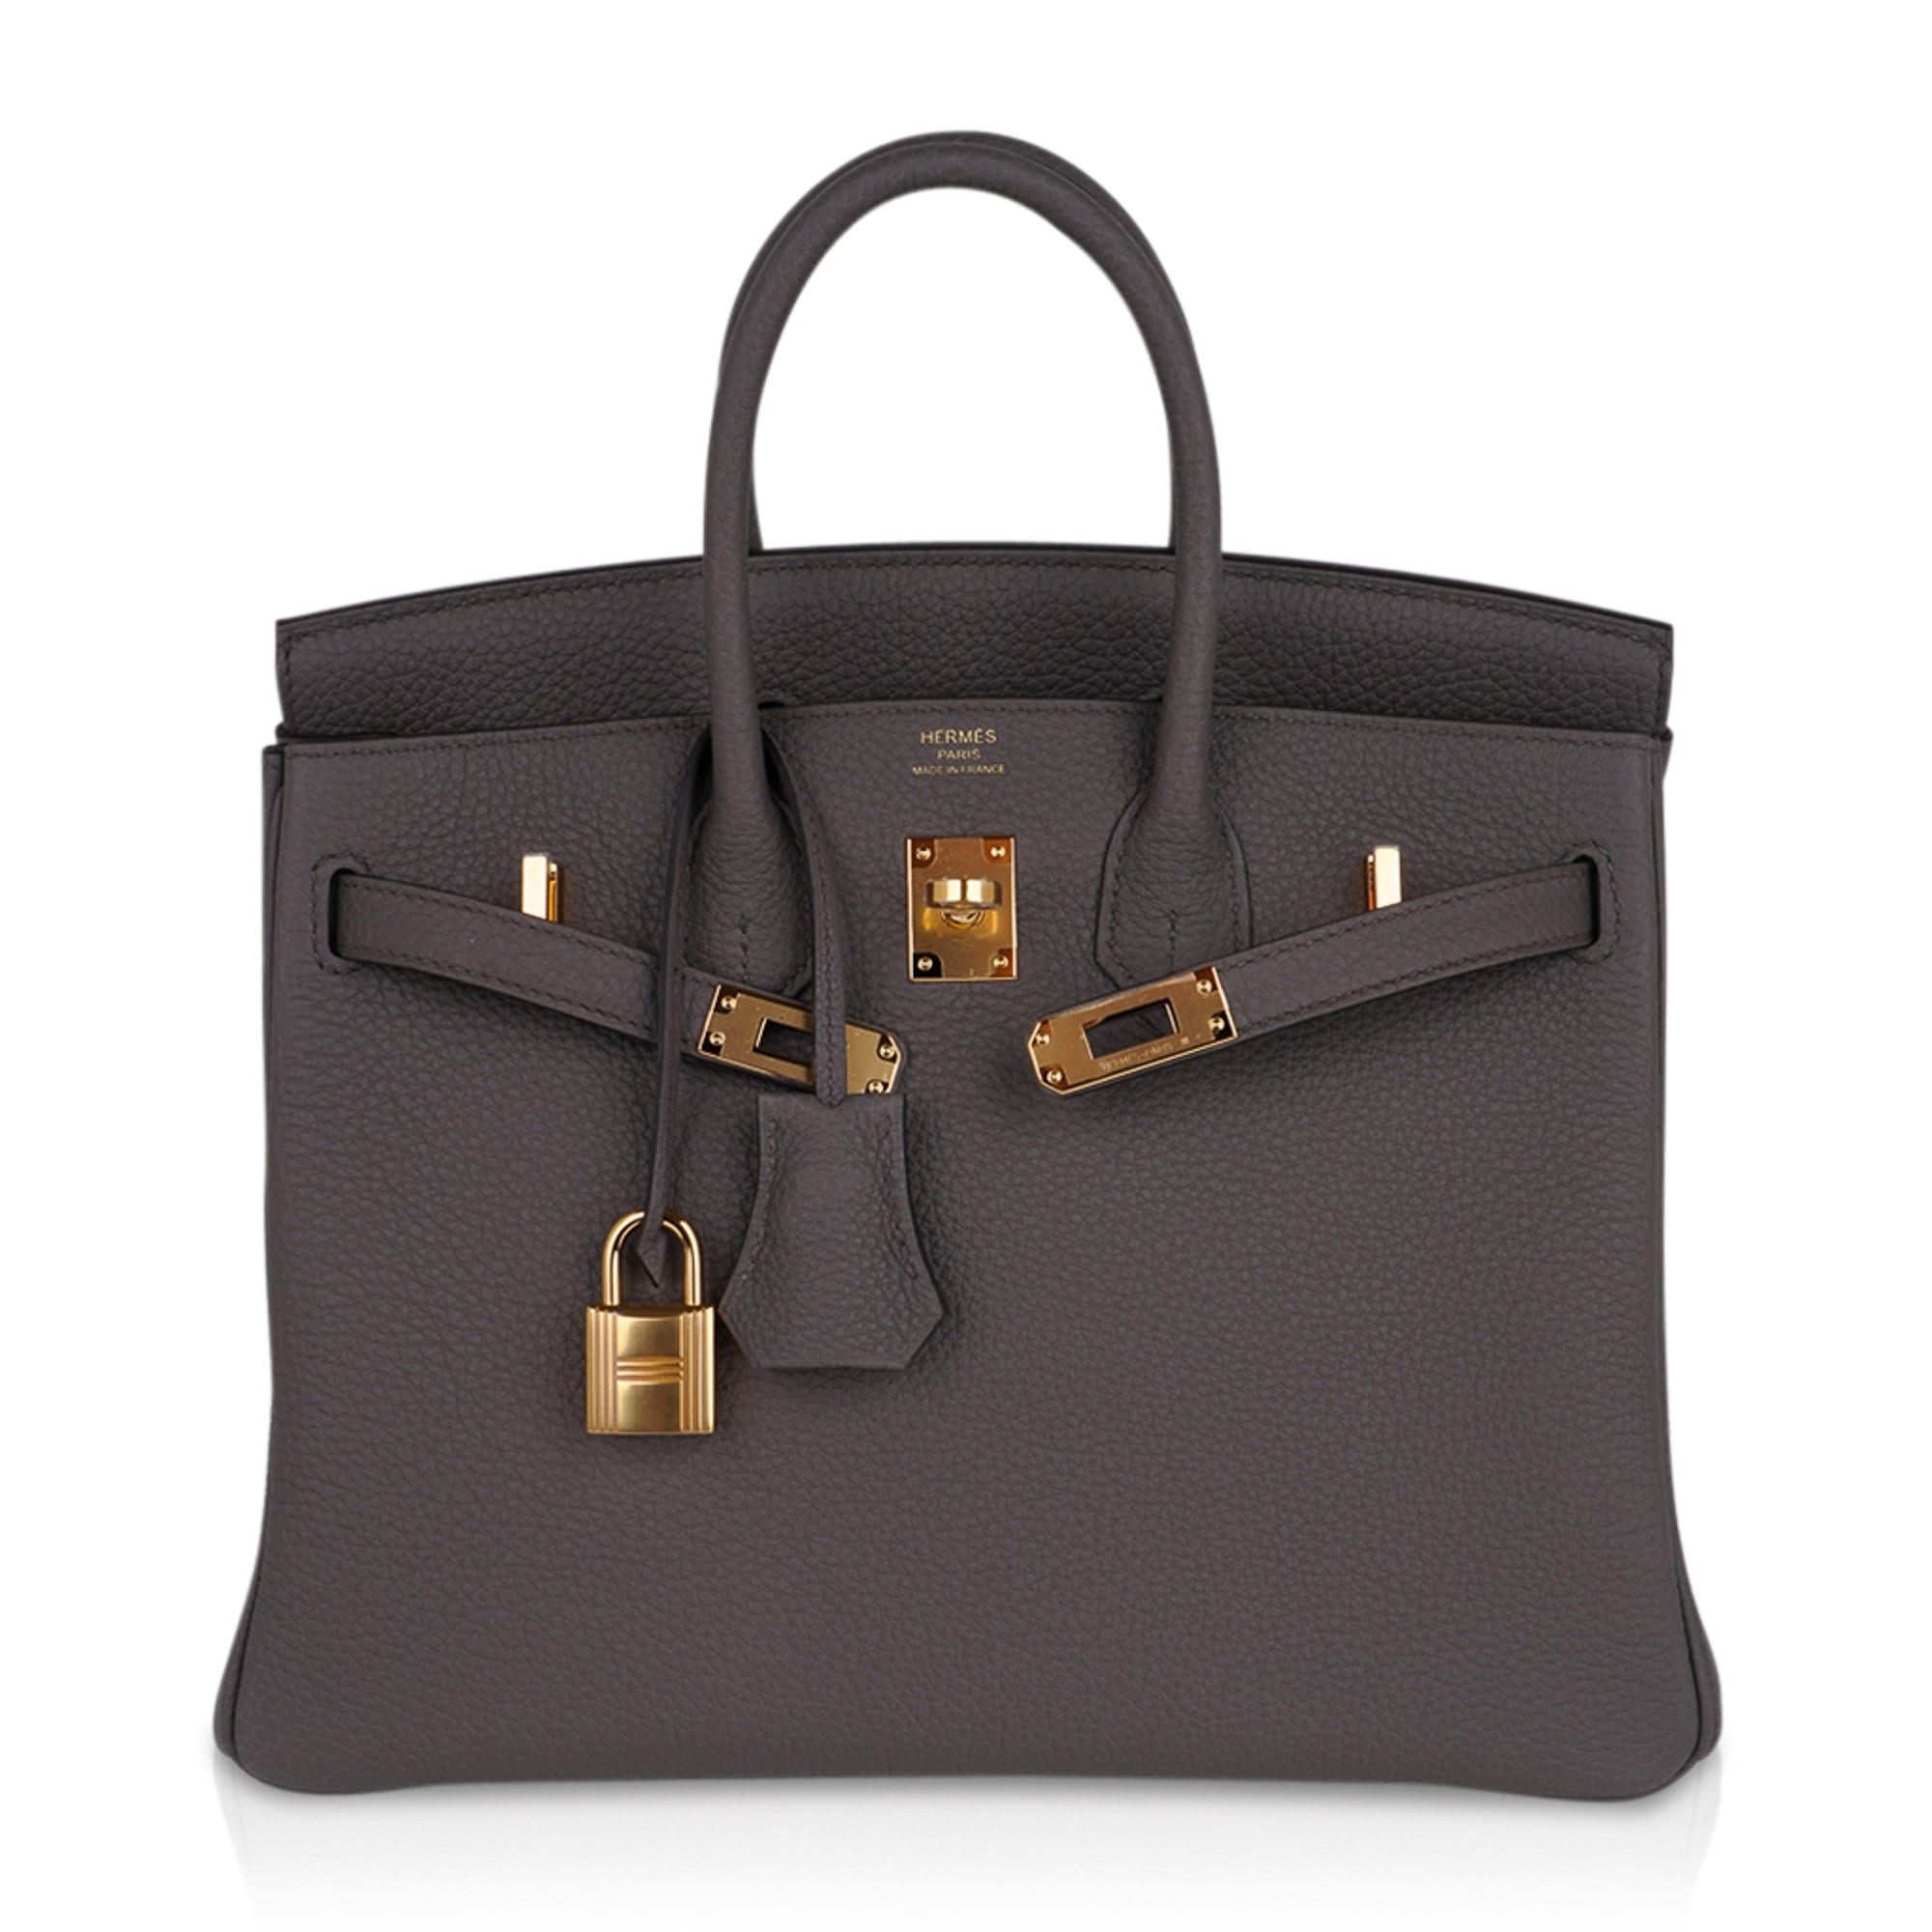 New arrival! 😍 Our Brand New Birkin 25 in Etoupe Togo leather